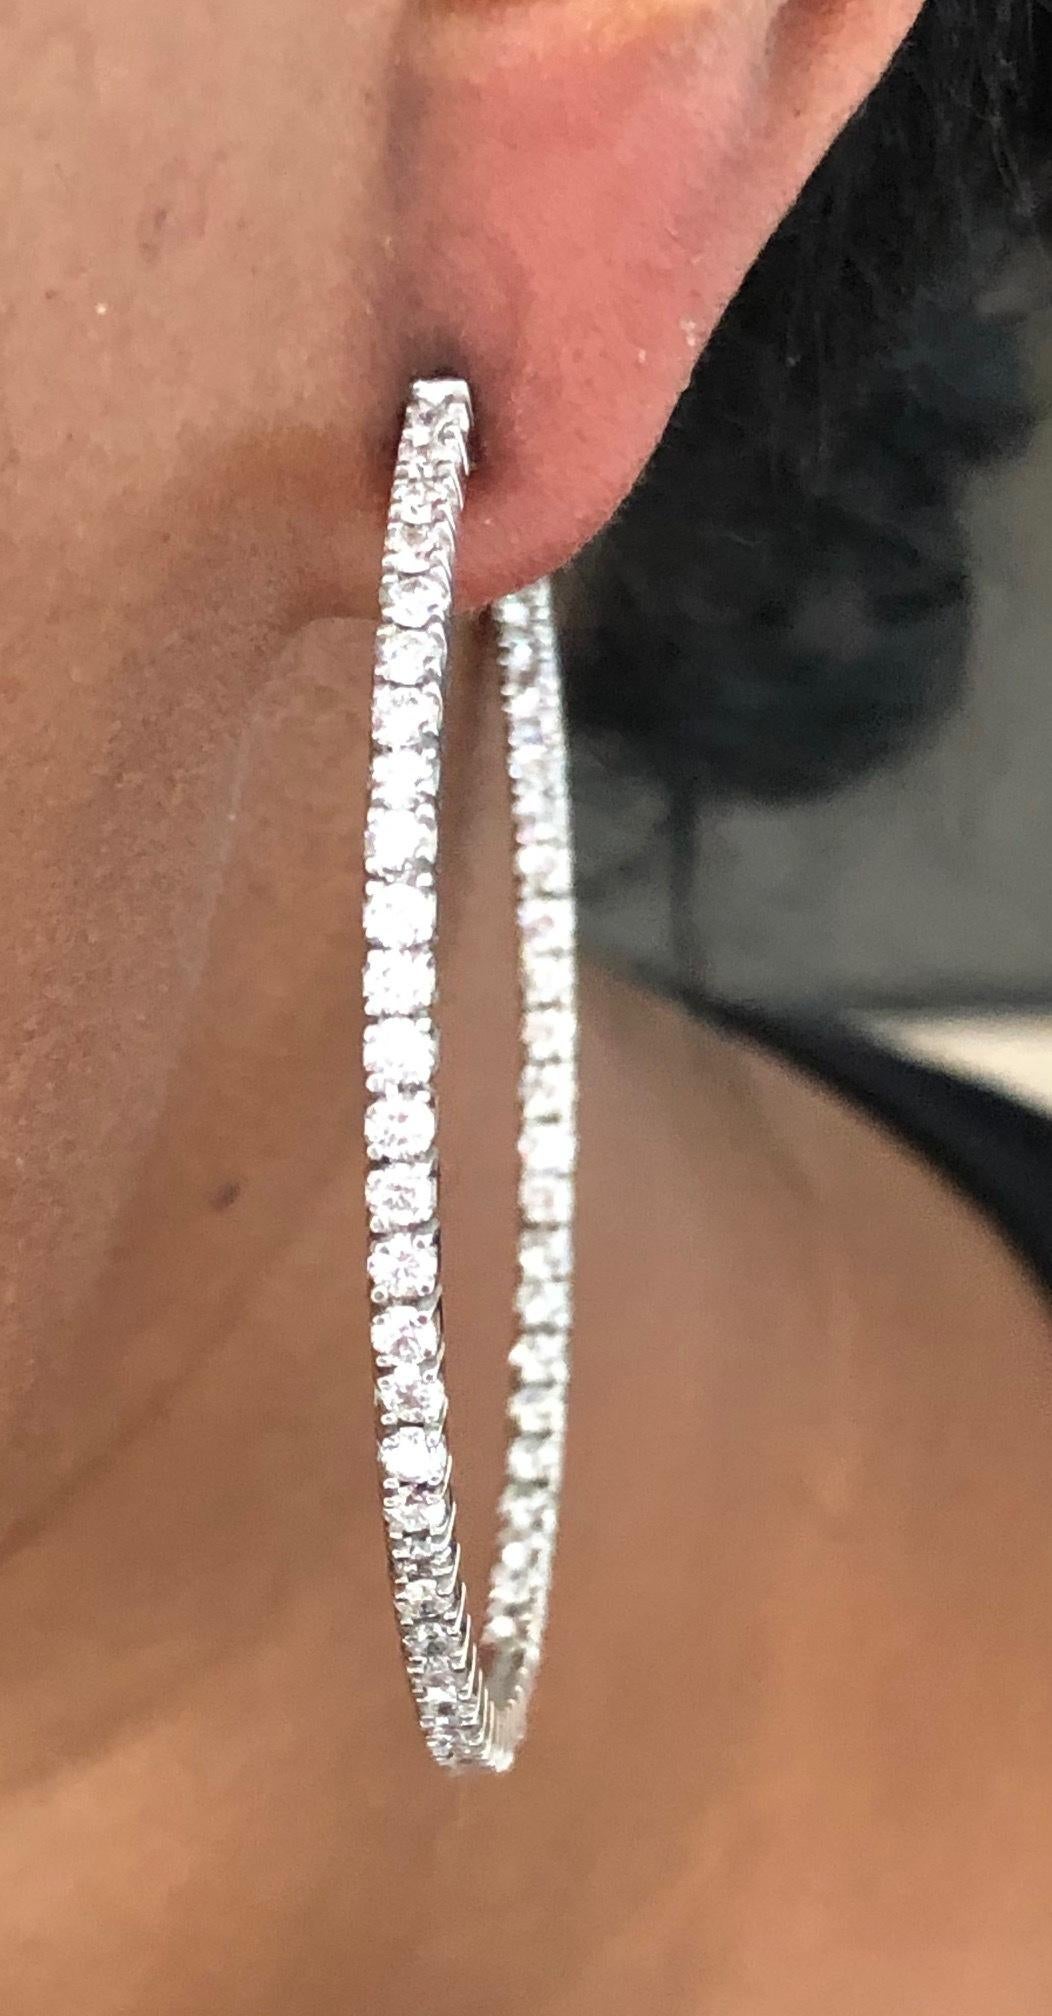 Every woman loves a large pair of Diamond Hoop Earrings, these here are 2 inches in diameter, made in 18K White Gold, set with 120 round Diamonds 4.00 carats.
Earring diameter: 2 inches ( 5.1 CM )

We design and manufacture our jewelry in New York